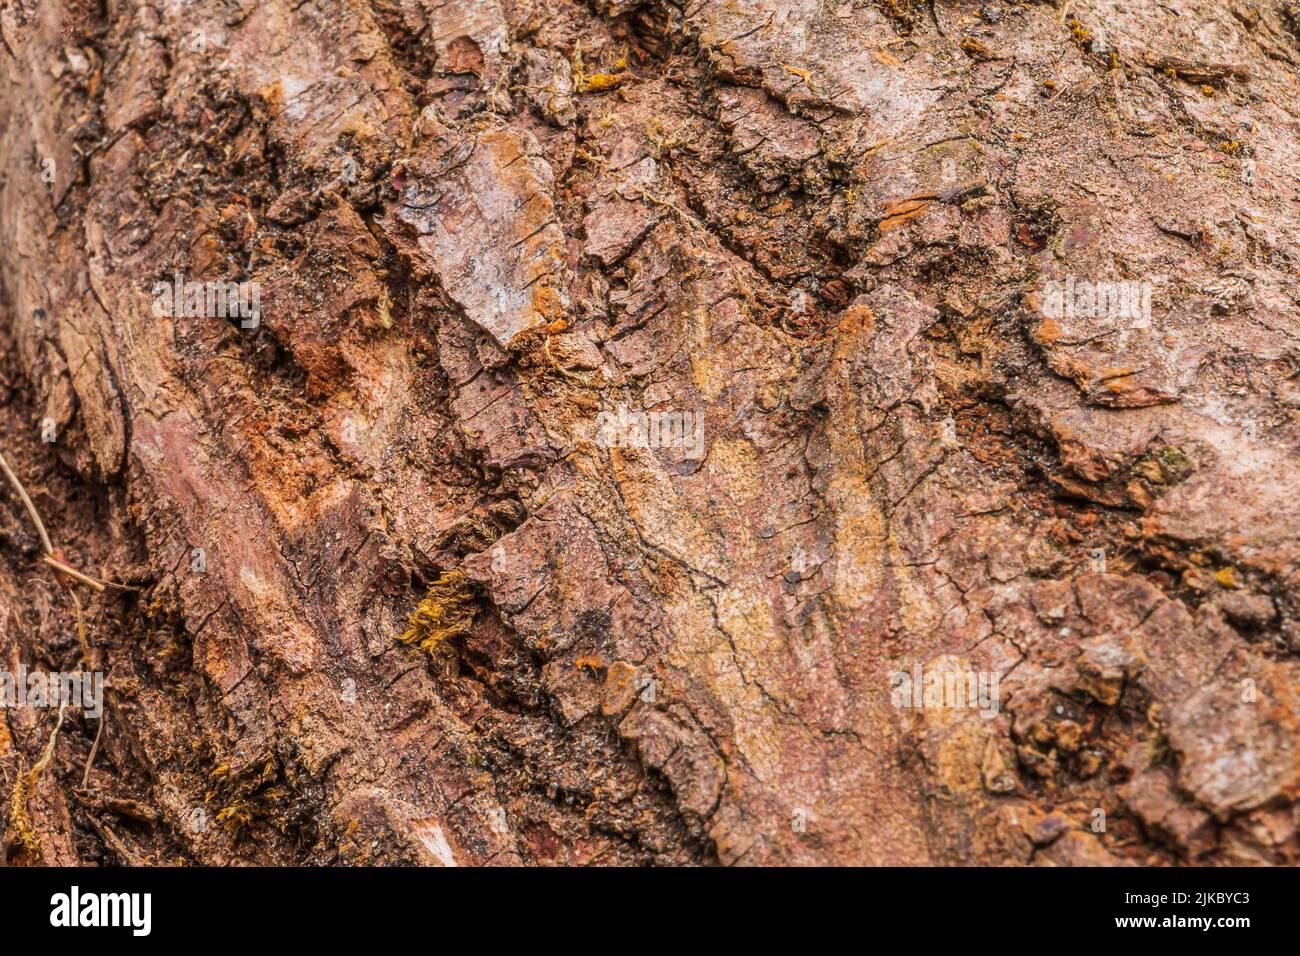 unstructured surface of a bark in daylight. brown bark from a tree. Structures of the bark visible in detail. Outer skin of a pine tree. Light brown Stock Photo